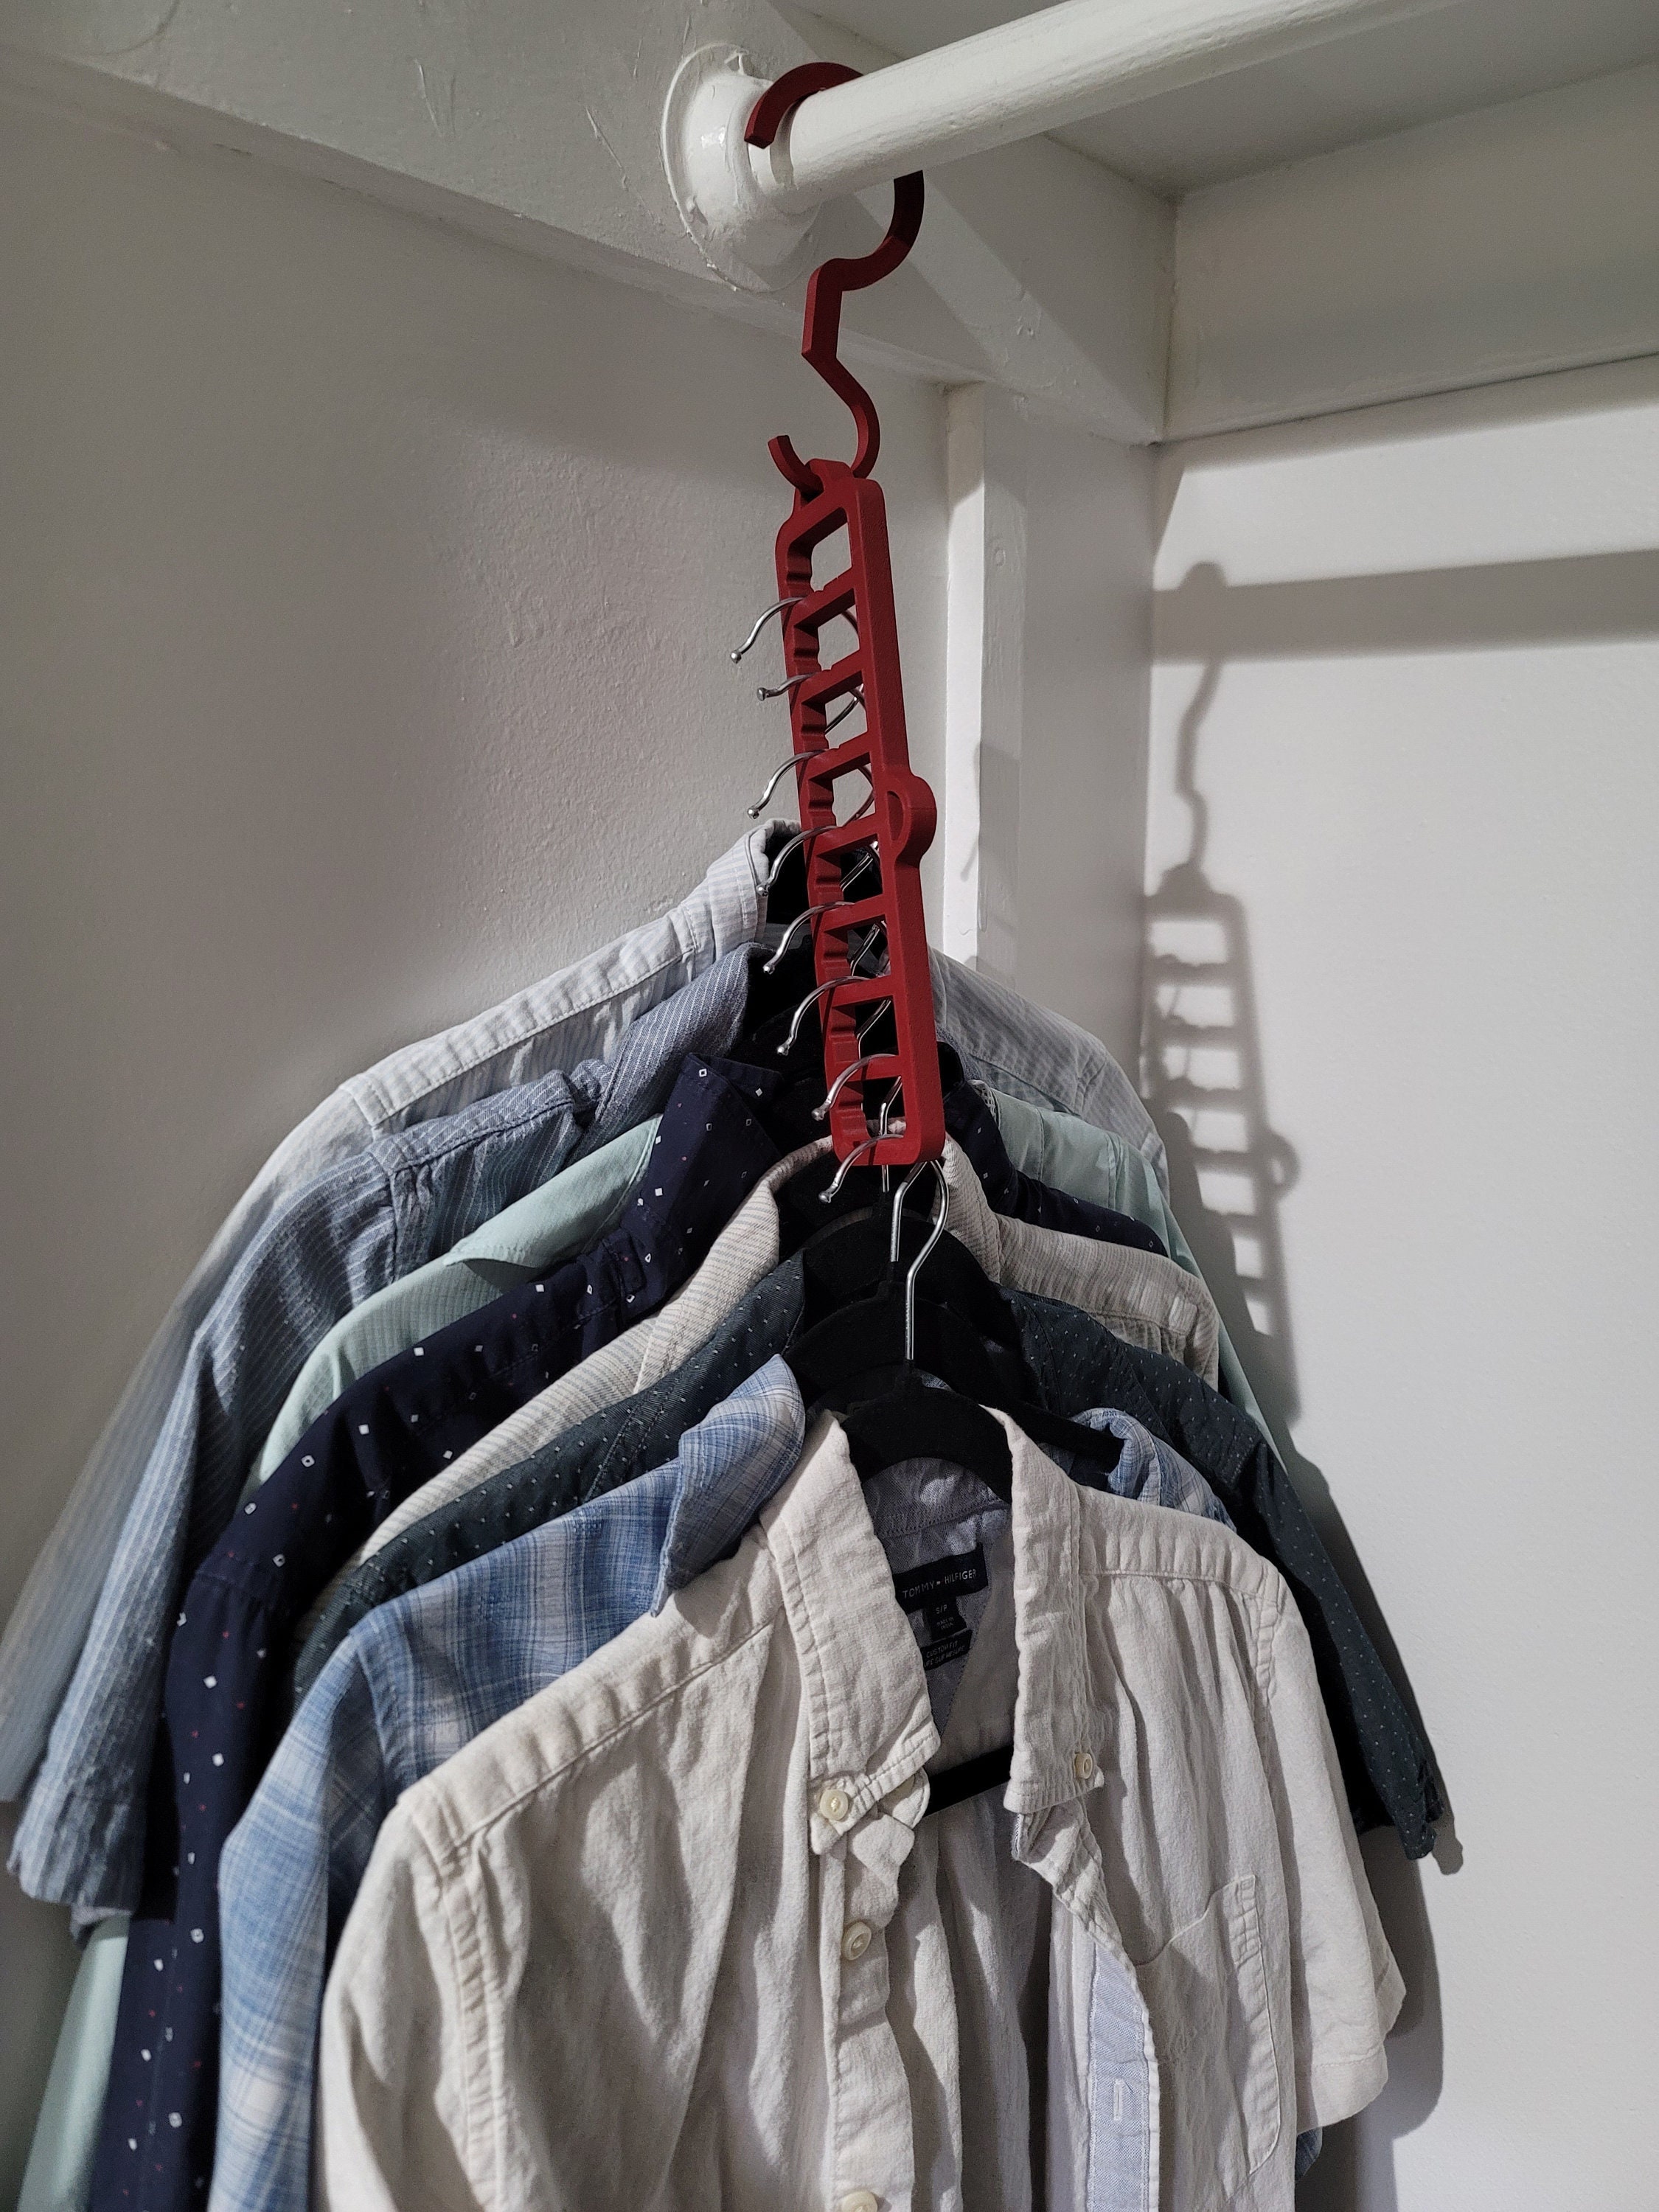 Original As Seen On TV Ruby Space Triangles, Cascade Hangers to Create Up  to 3X More Closet Space 